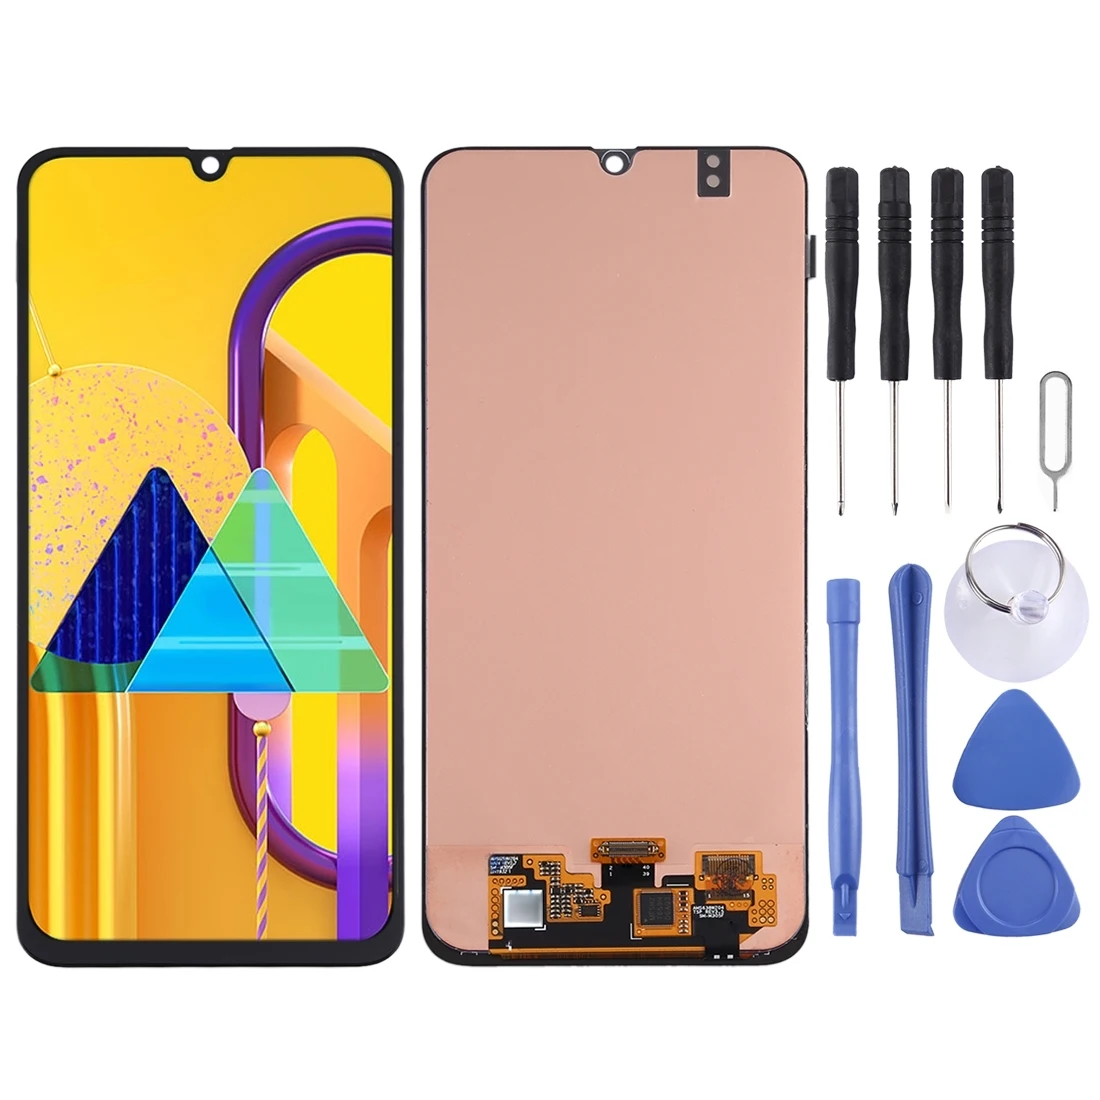 

Original lcd screen for Galaxy M30s Original Super AMOLED Material LCD Screen and Digitizer Full Assembly